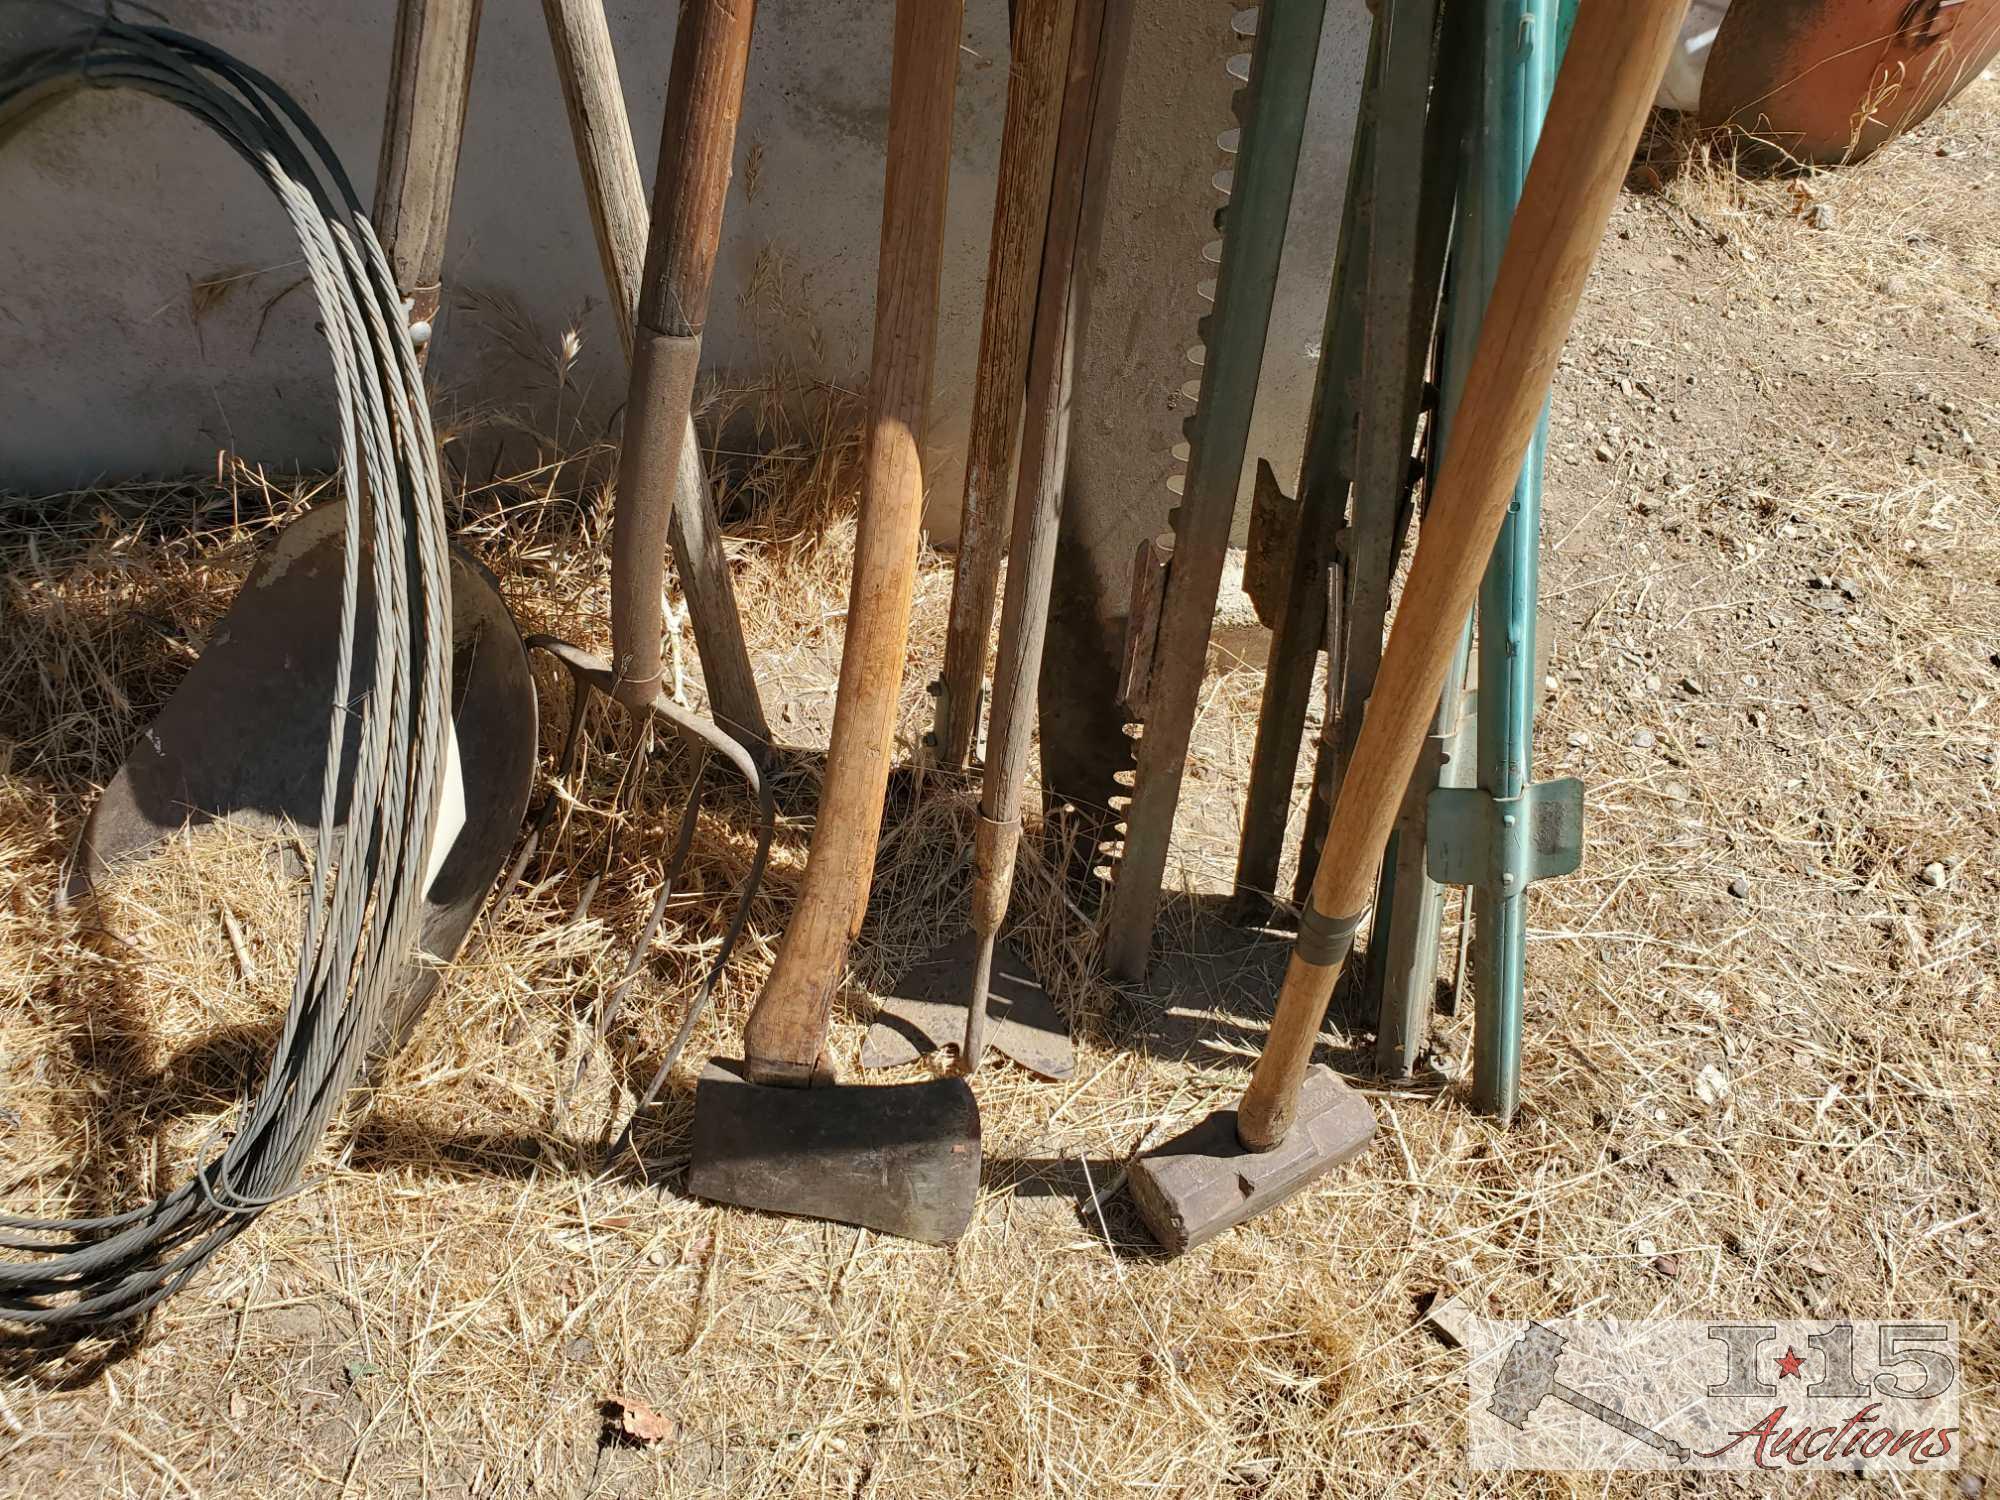 Cable, Garden Tools, And T Posts